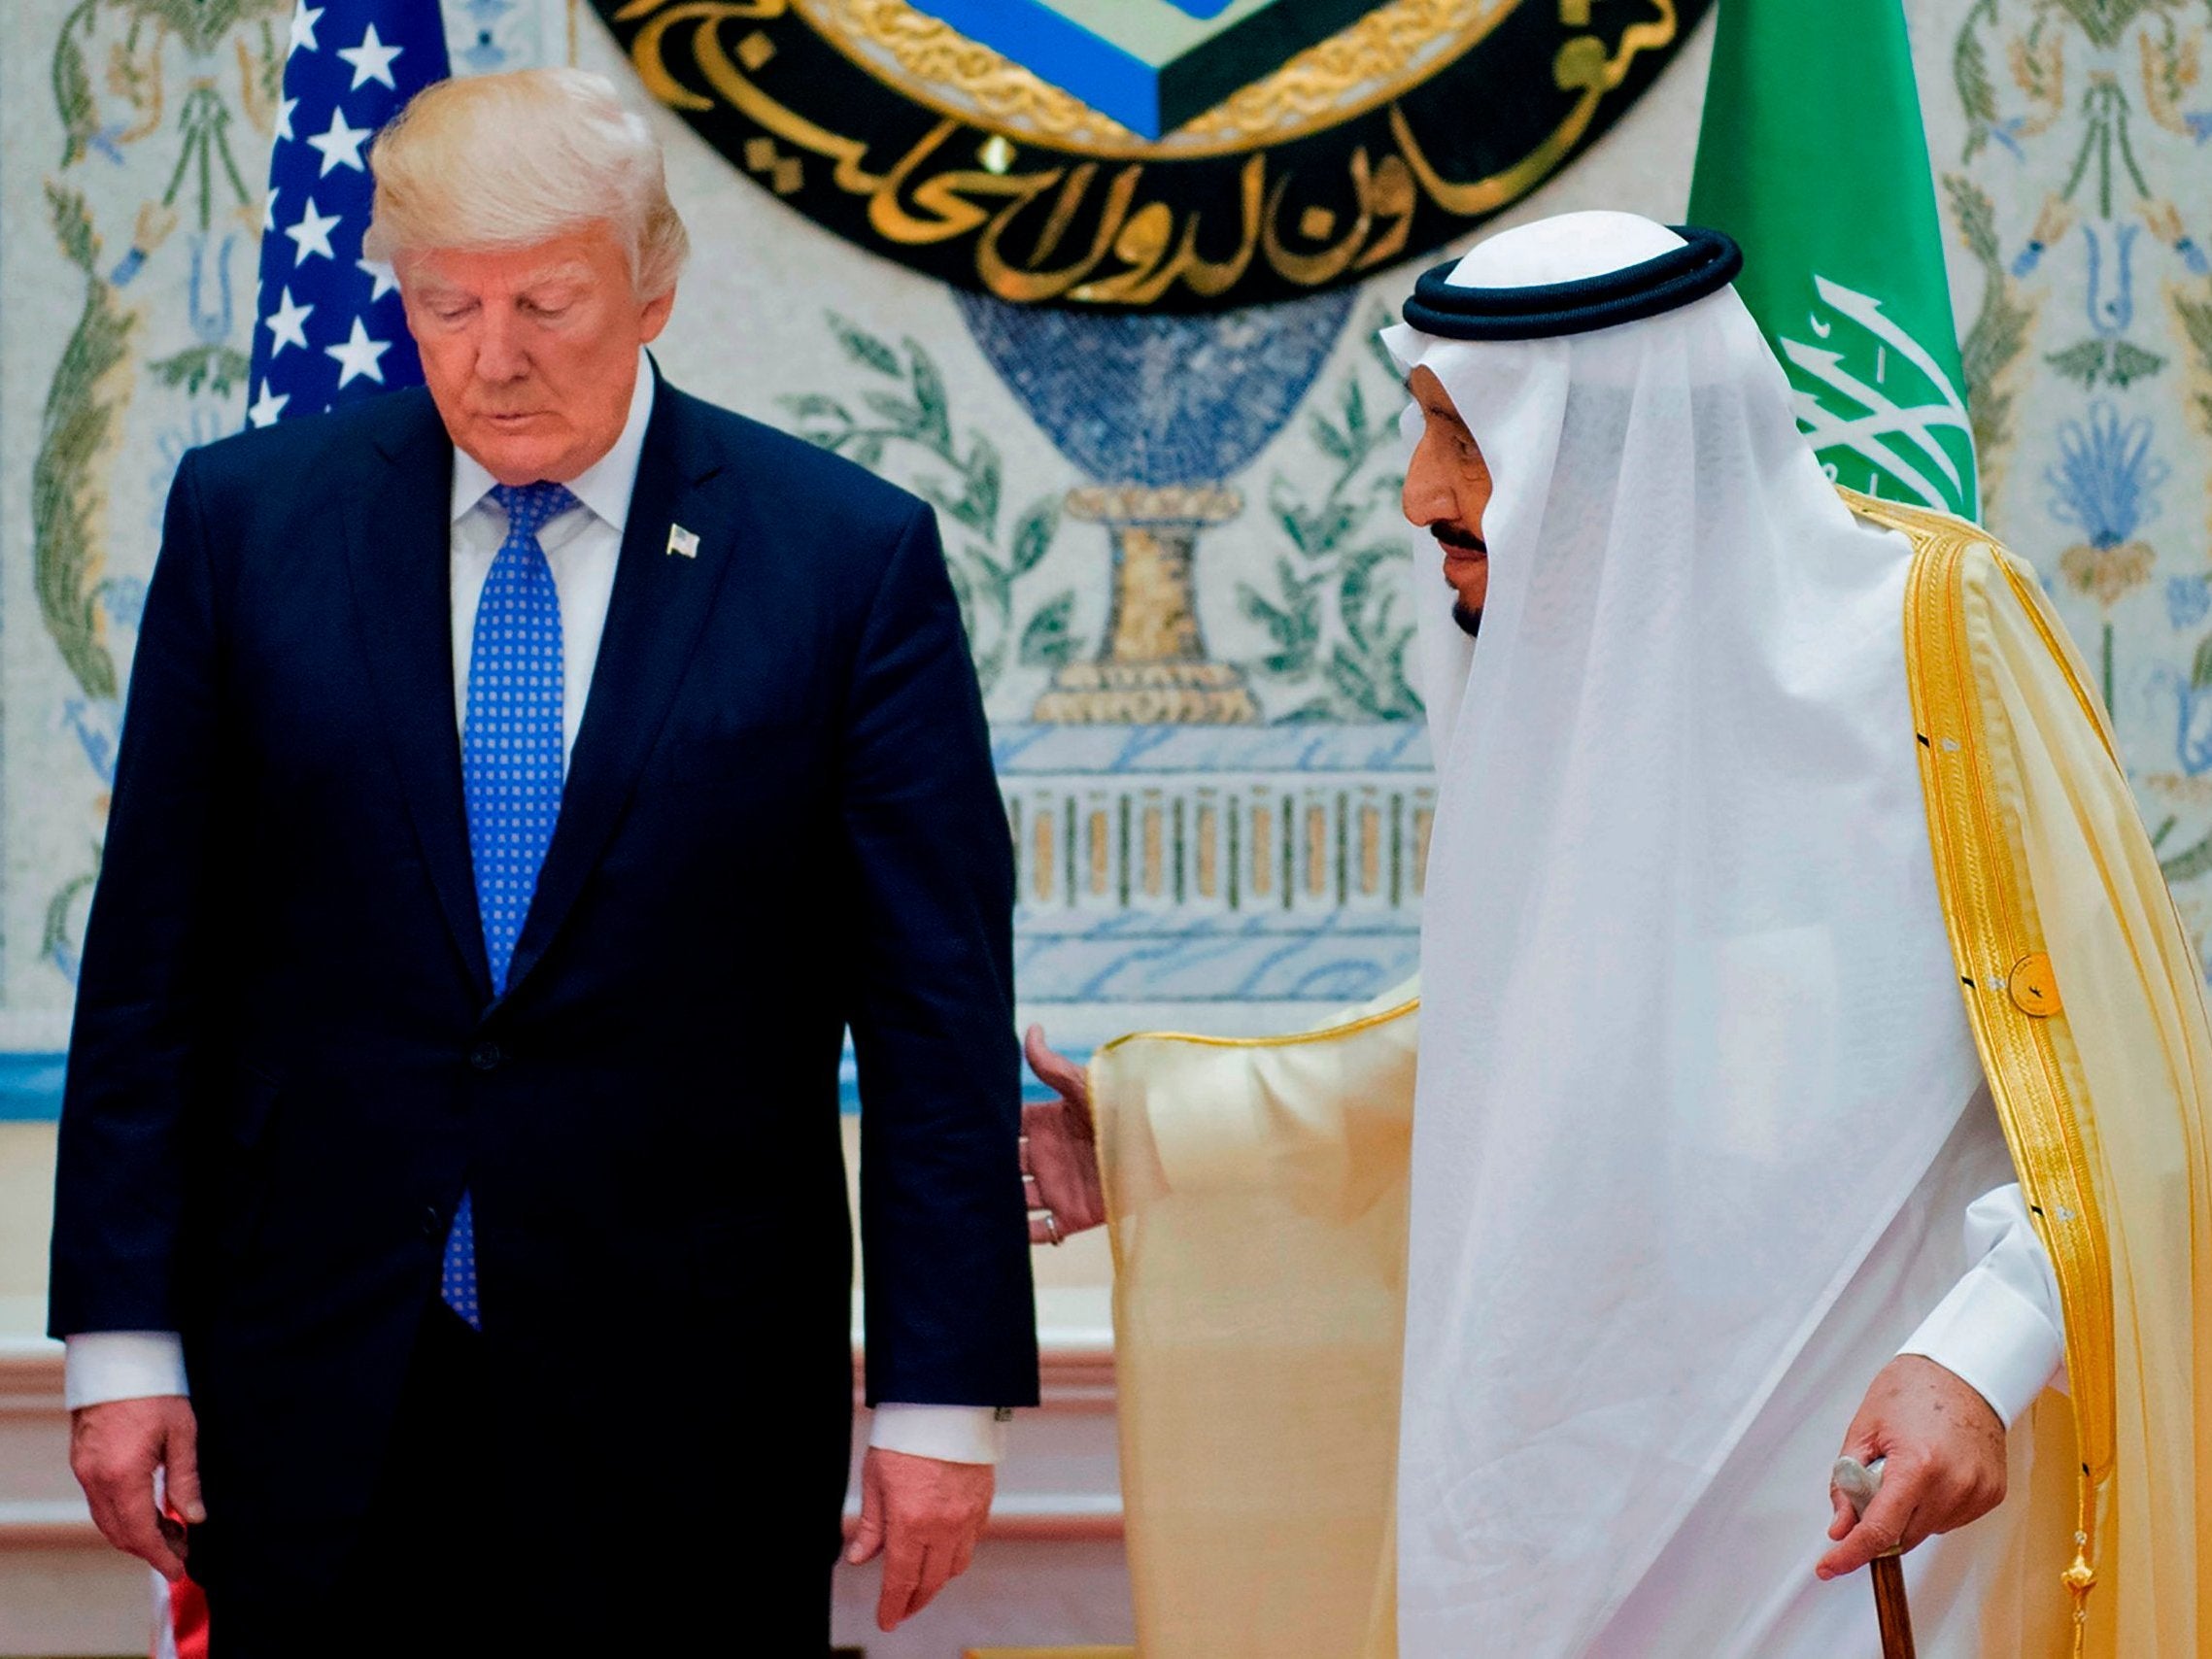 King Salman bin Abdulaziz al-Saud and Donald Trump arriving for a meeting with leaders of the Gulf Cooperation Council in Riyadh on 21 May 2017